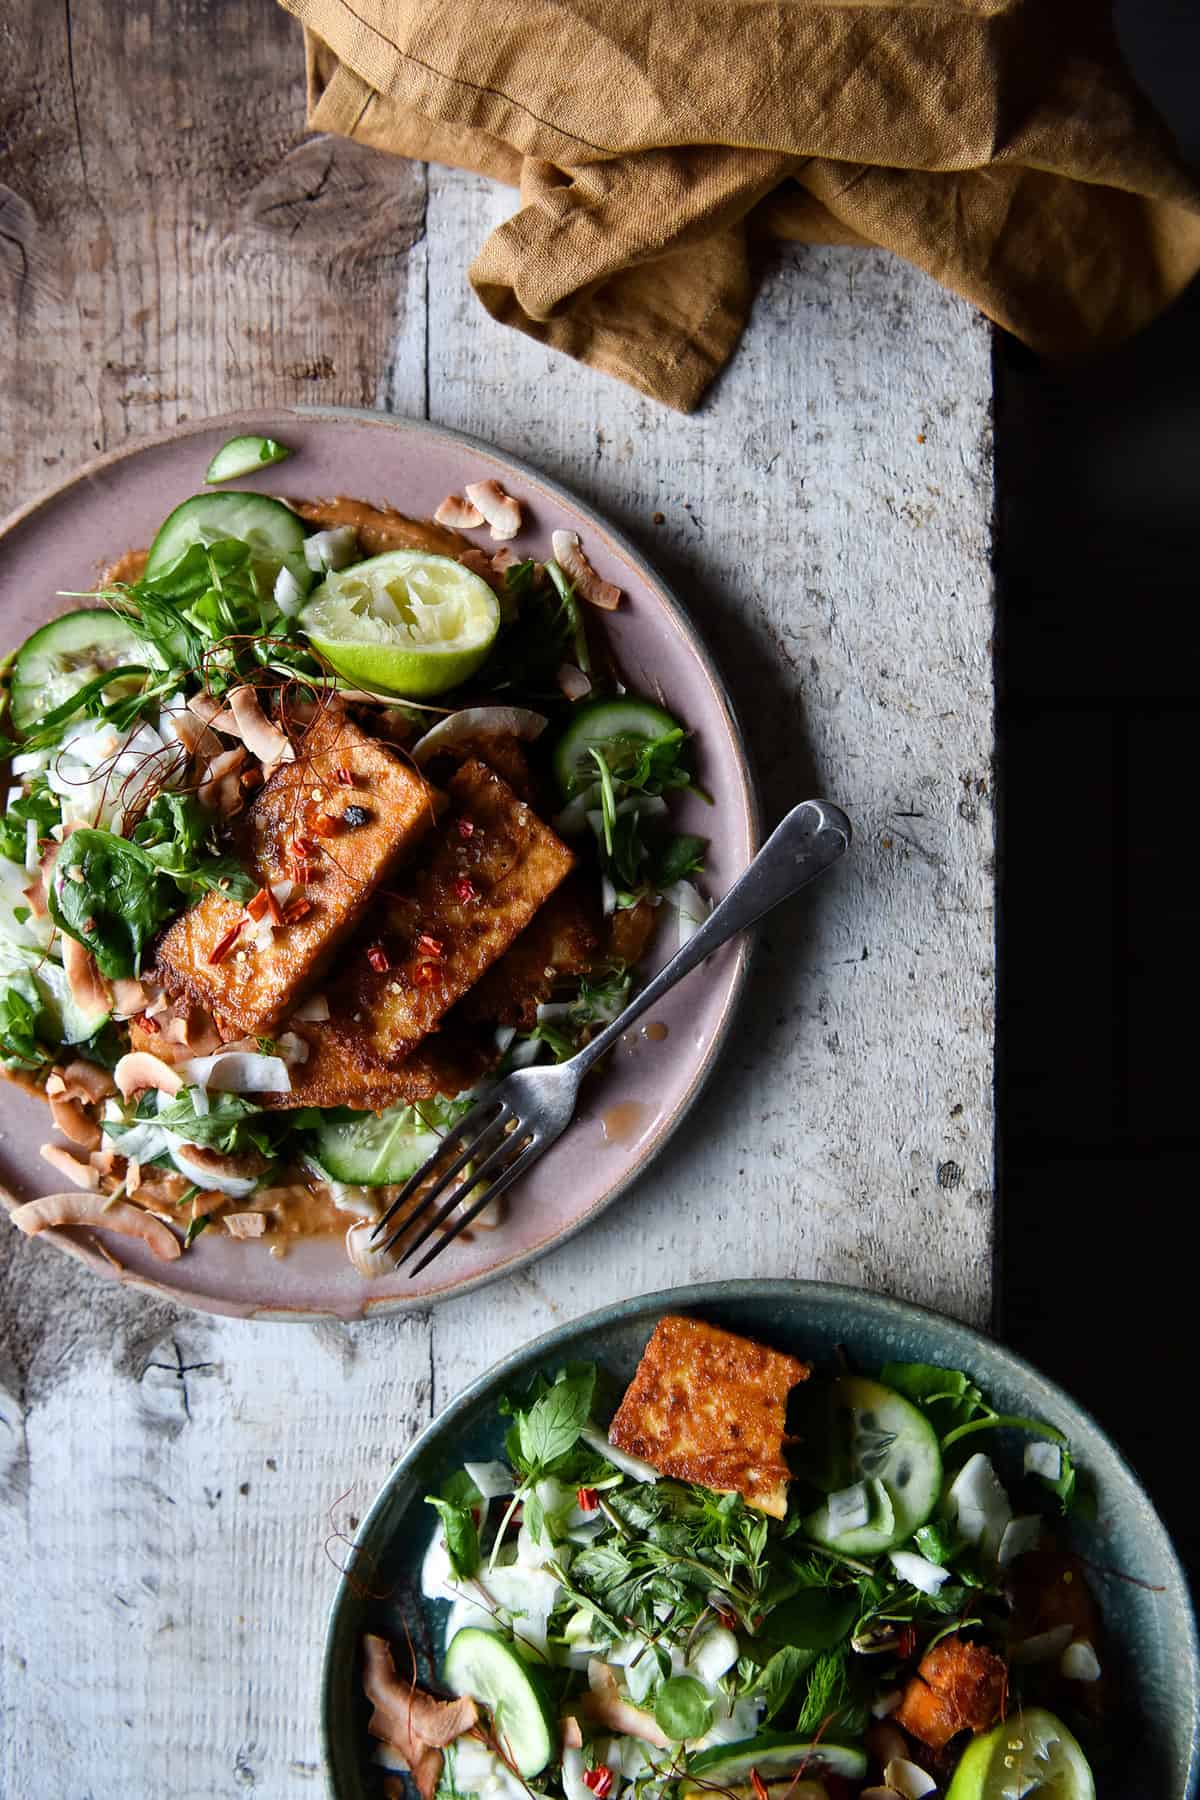 An aerial image of two plates of vegan, gluten free salt and pepper tofu with kaffir satay and fennel salad on a wooden table.